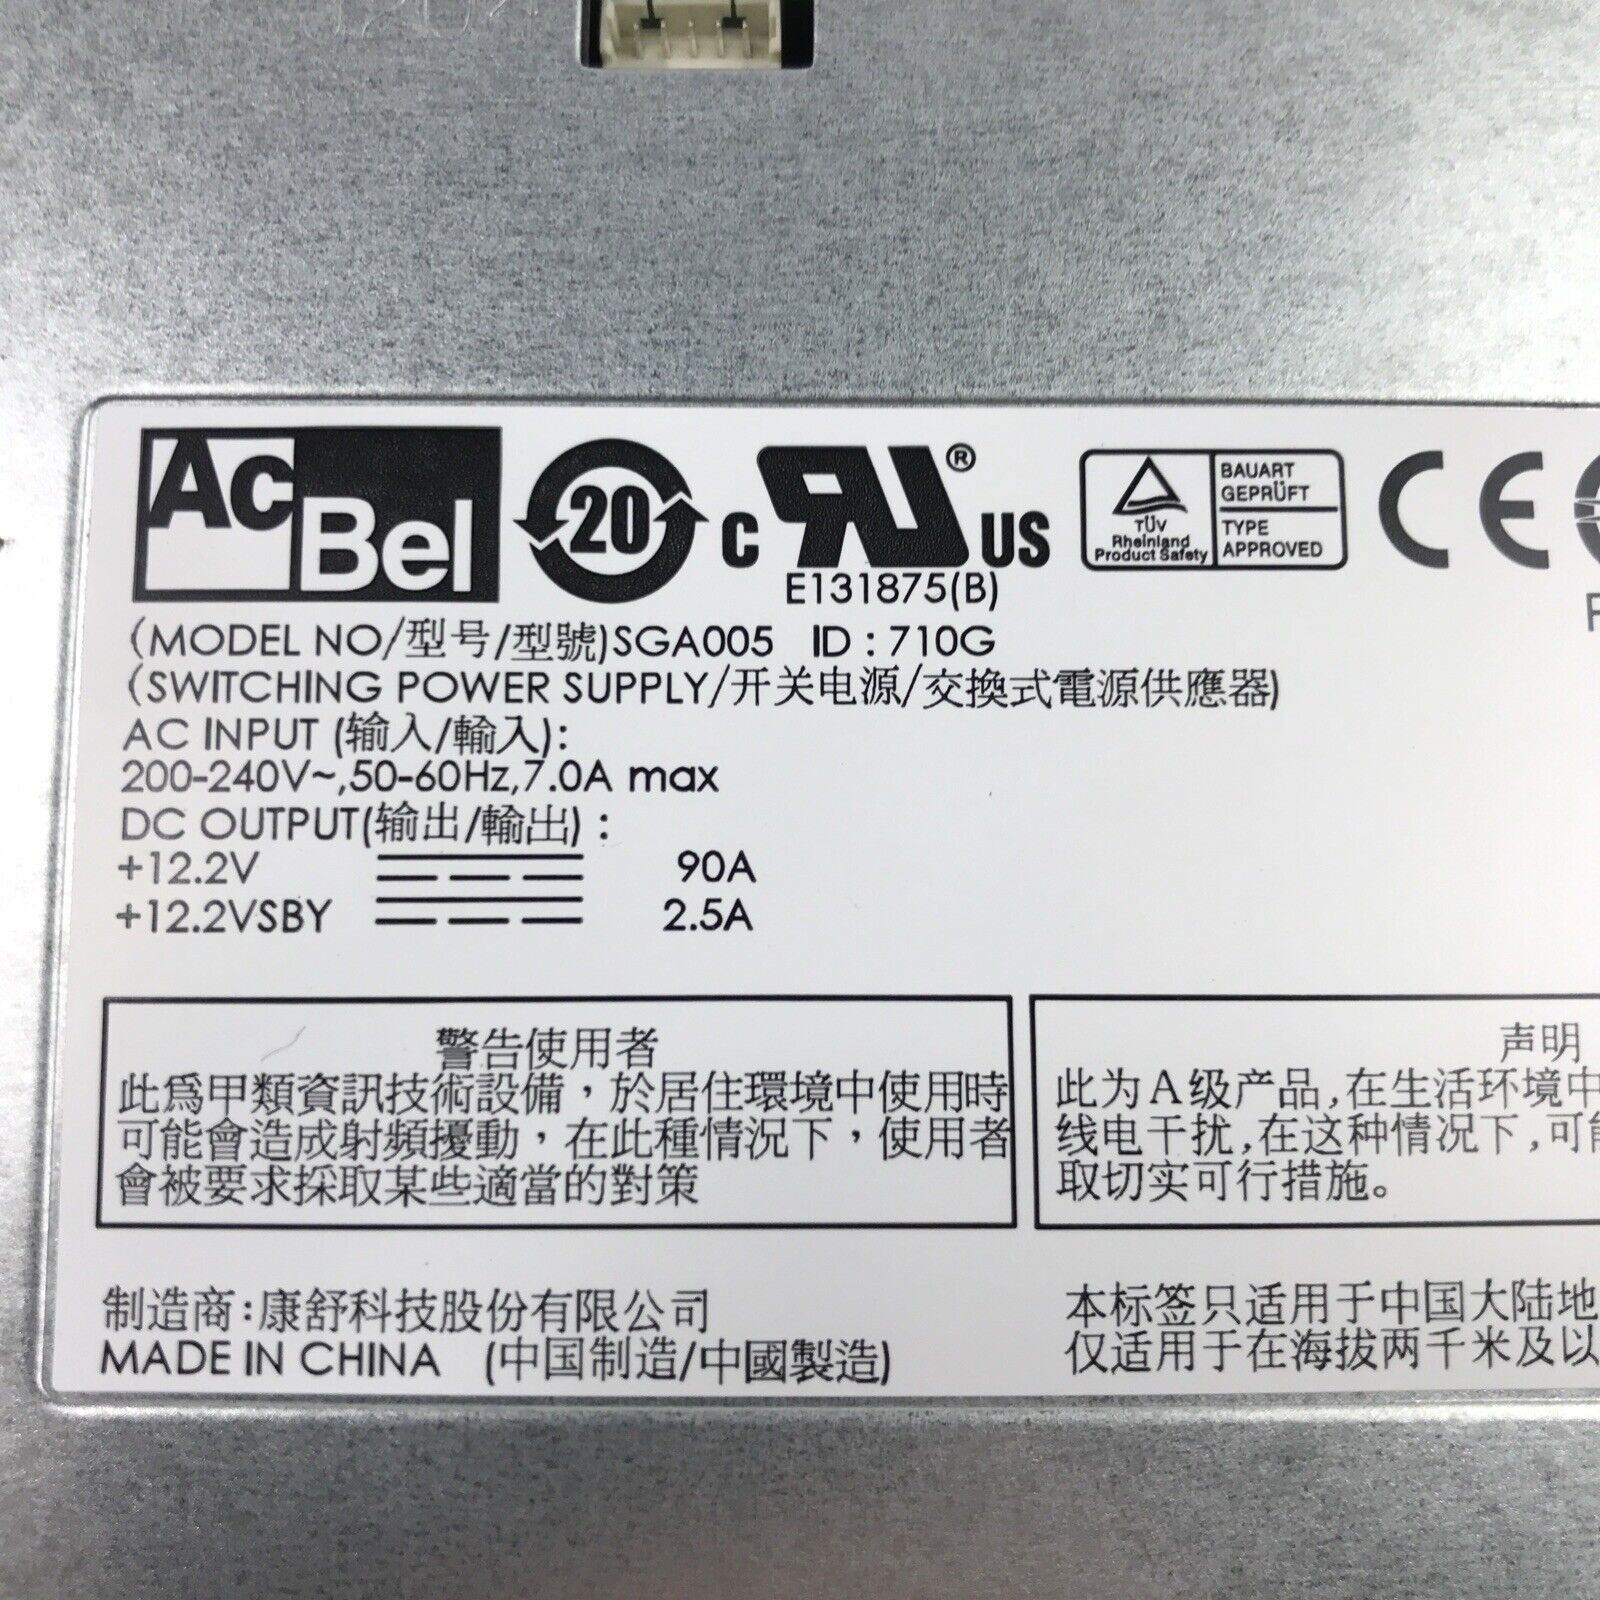 ACBel SGAA005 240V 60Hz 90A 071-000-578-01 Switching Power Supply